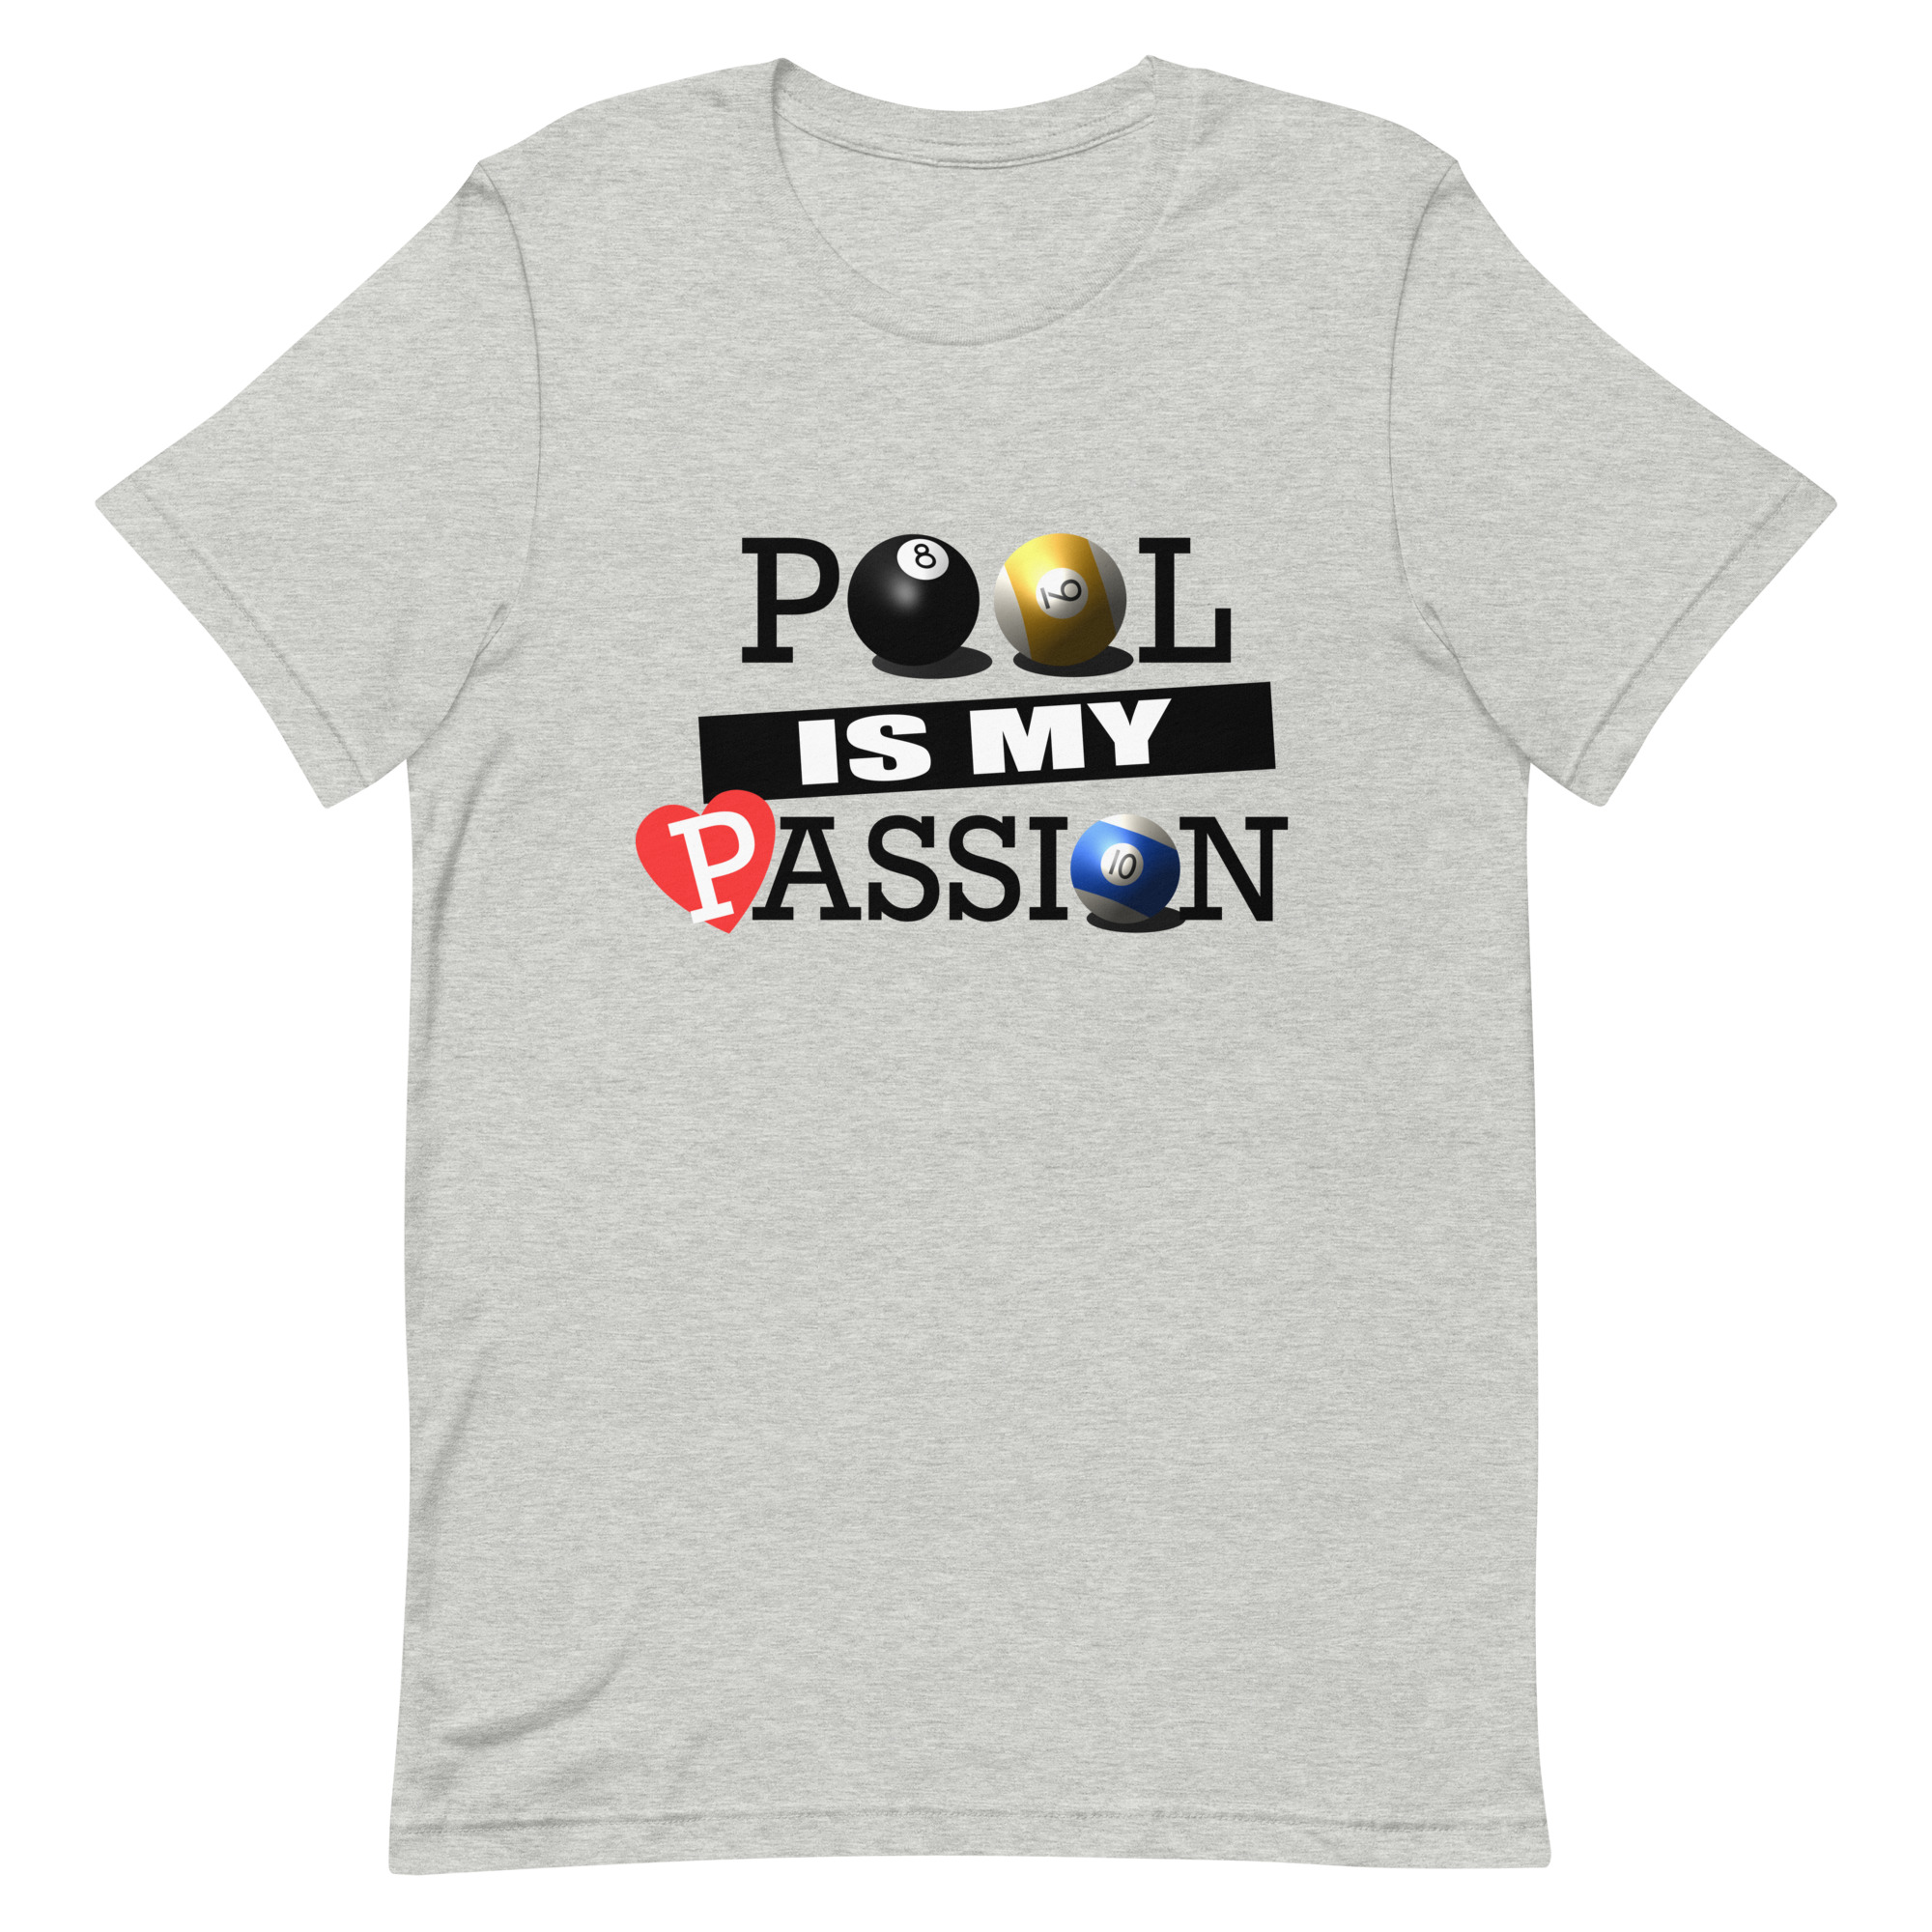 "Pool is My Passion" pool and billiard T-shirt